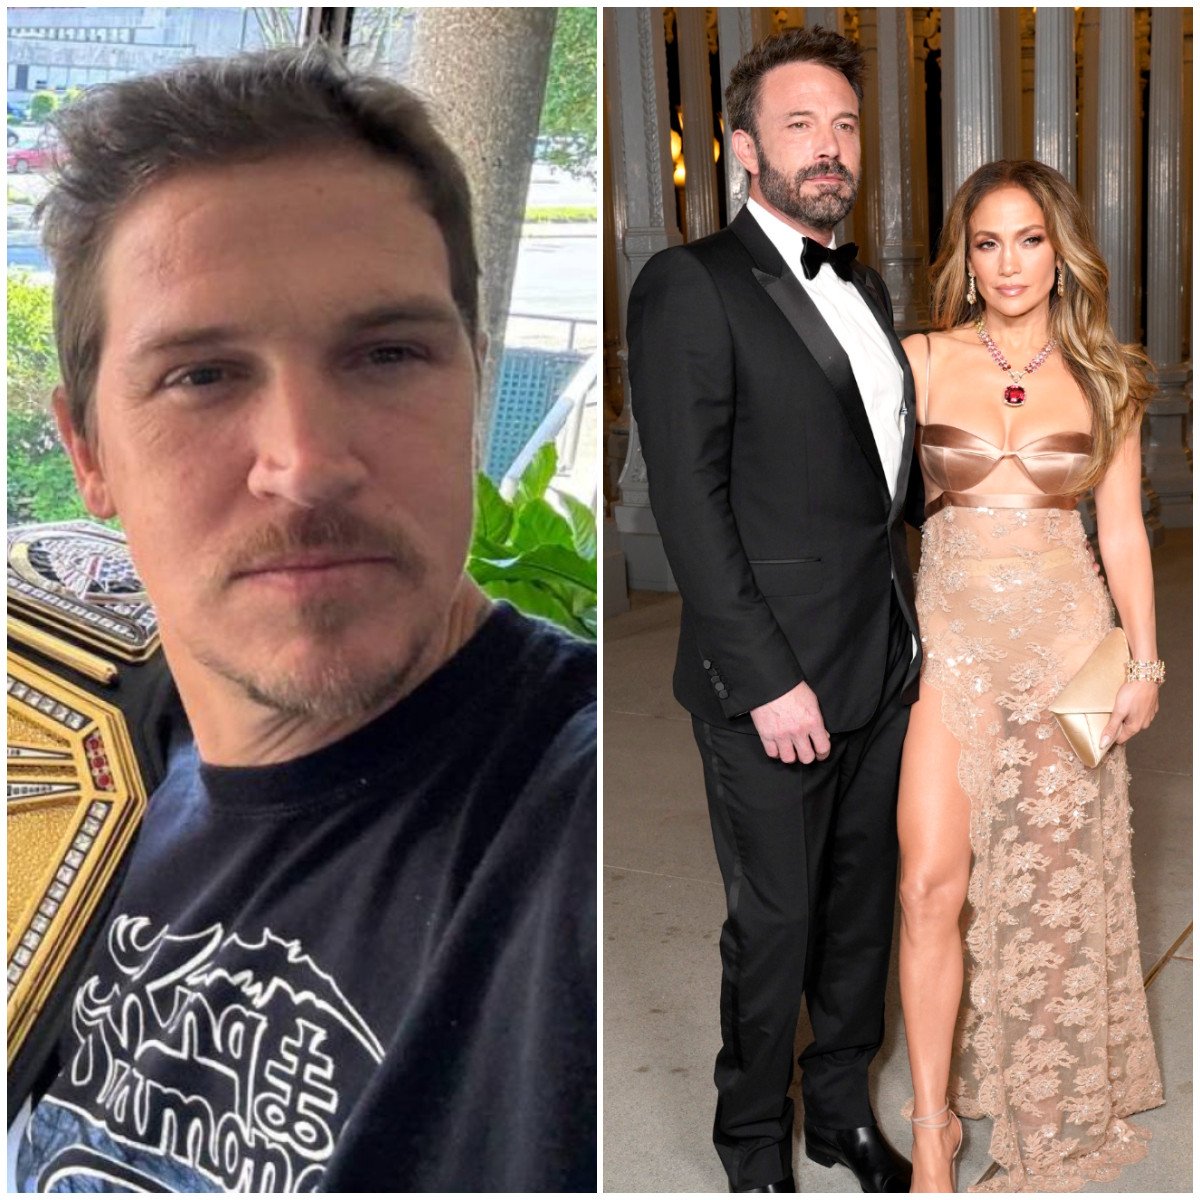 Jason Mewes has been asked to comment on his friend Ben Affleck’s marriage to J.Lo, and has decided to defend his friend. Photos: Jay Mewes/Facebook; Getty Images